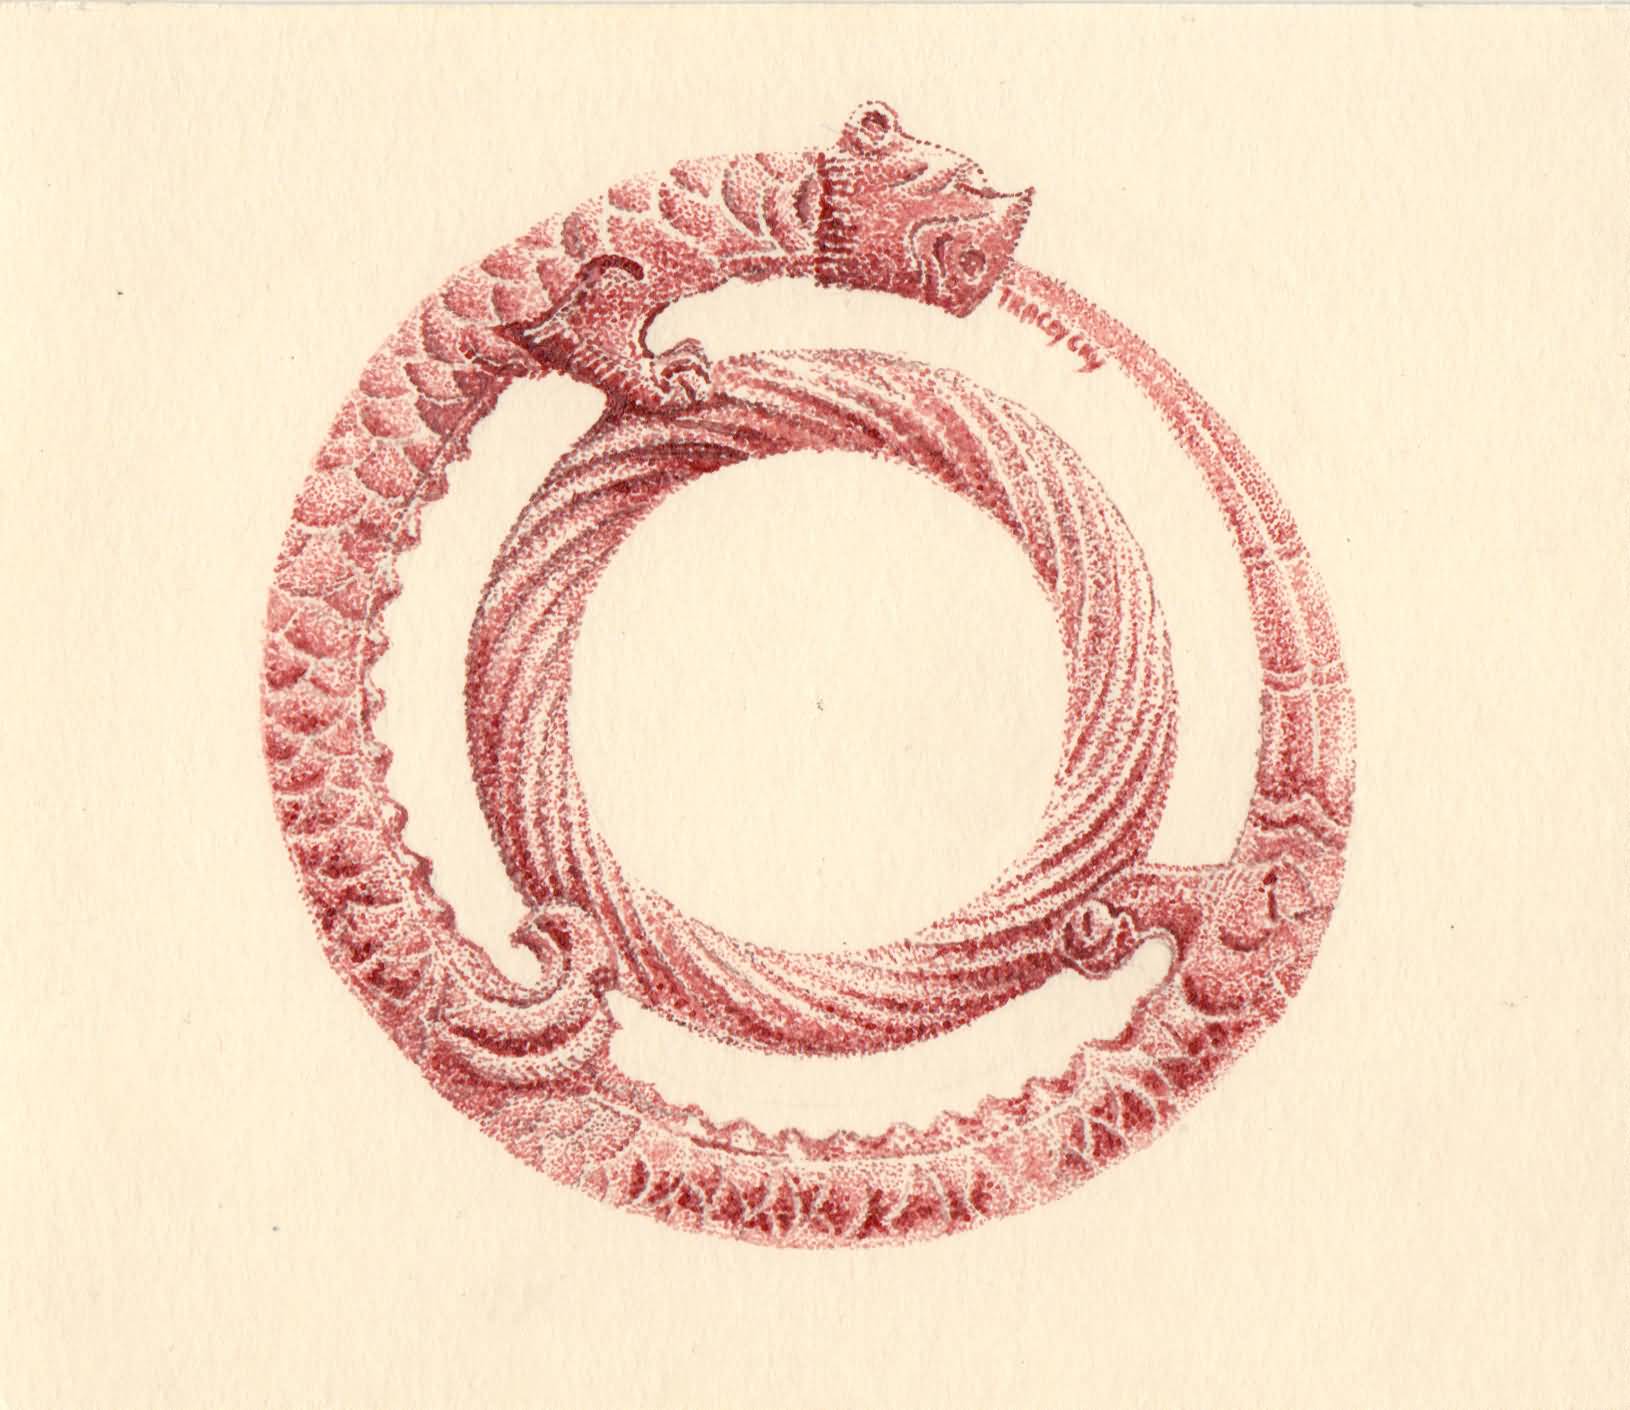 Pendand of a double ring feline dragon. Ink on paper. 10x10 cm. 2022